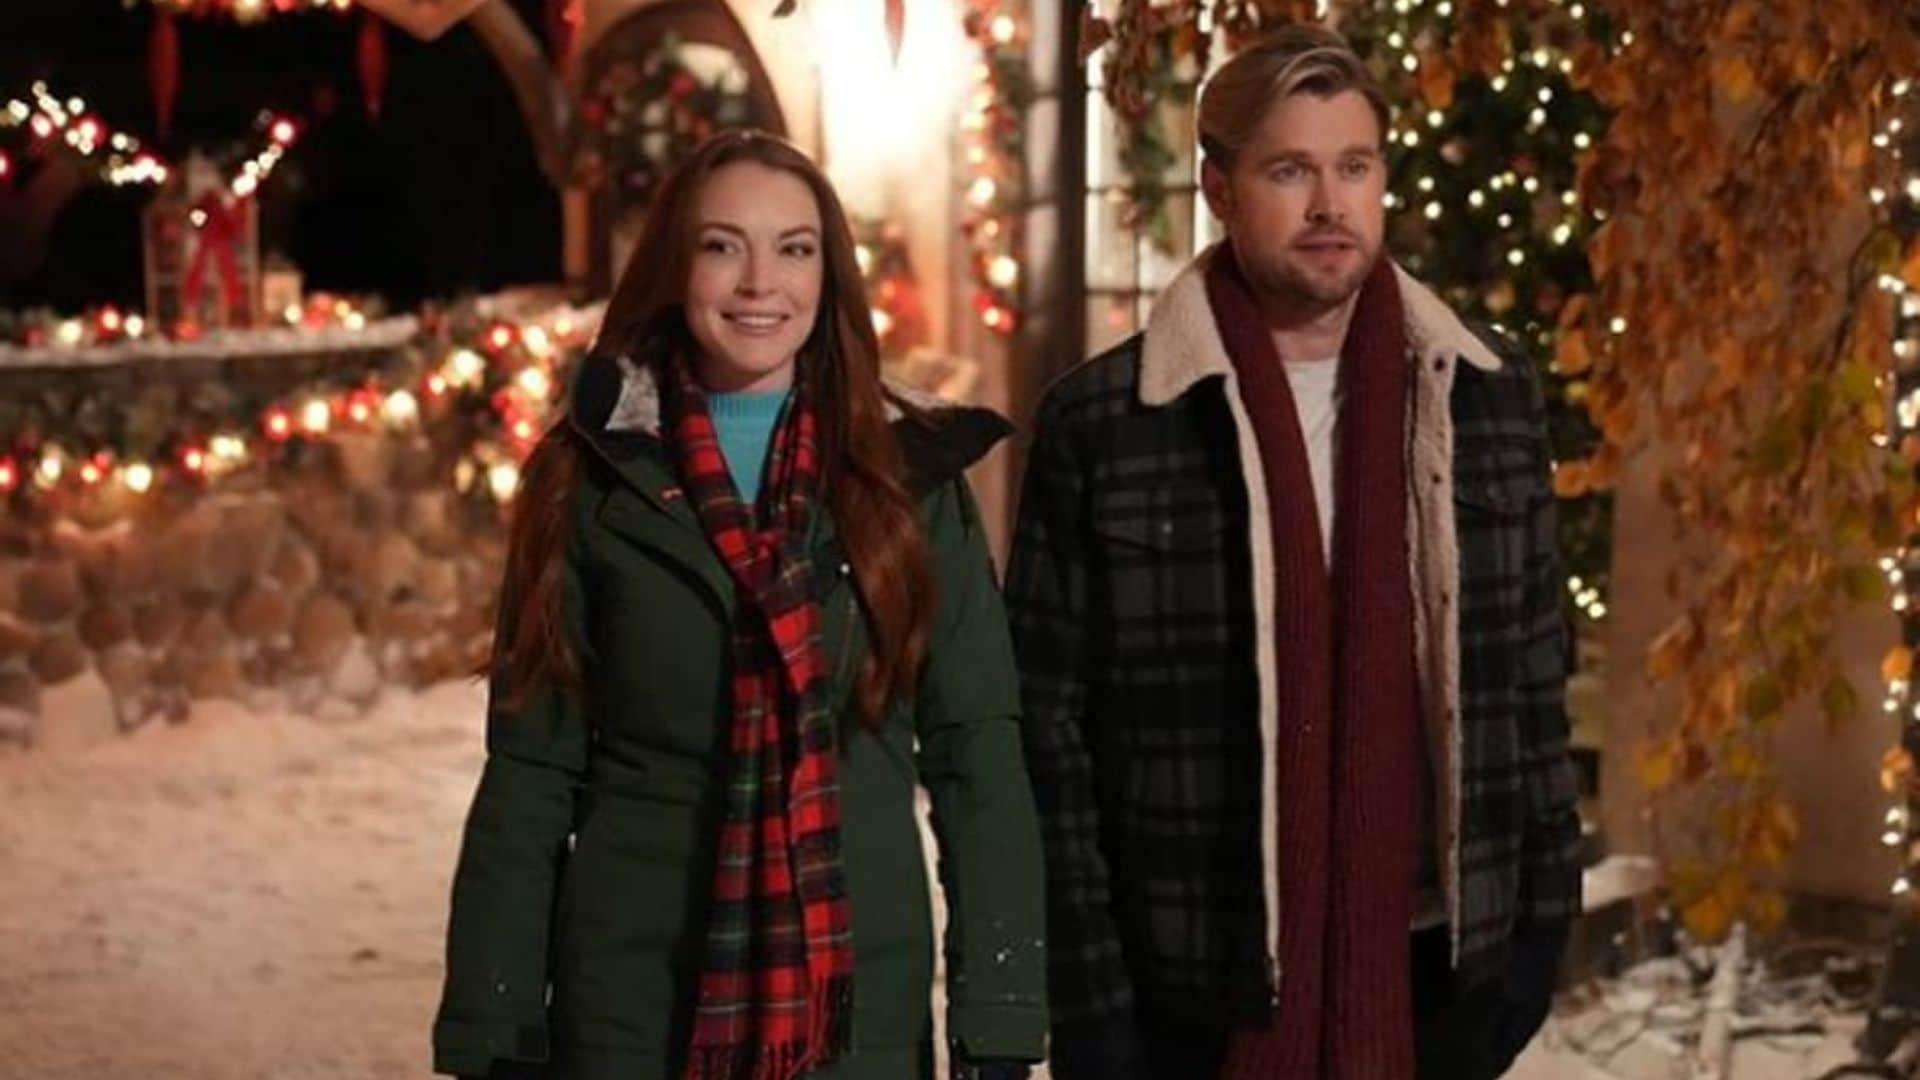 Watch Lindsay Lohan in official stills from upcoming Netflix Christmas movie